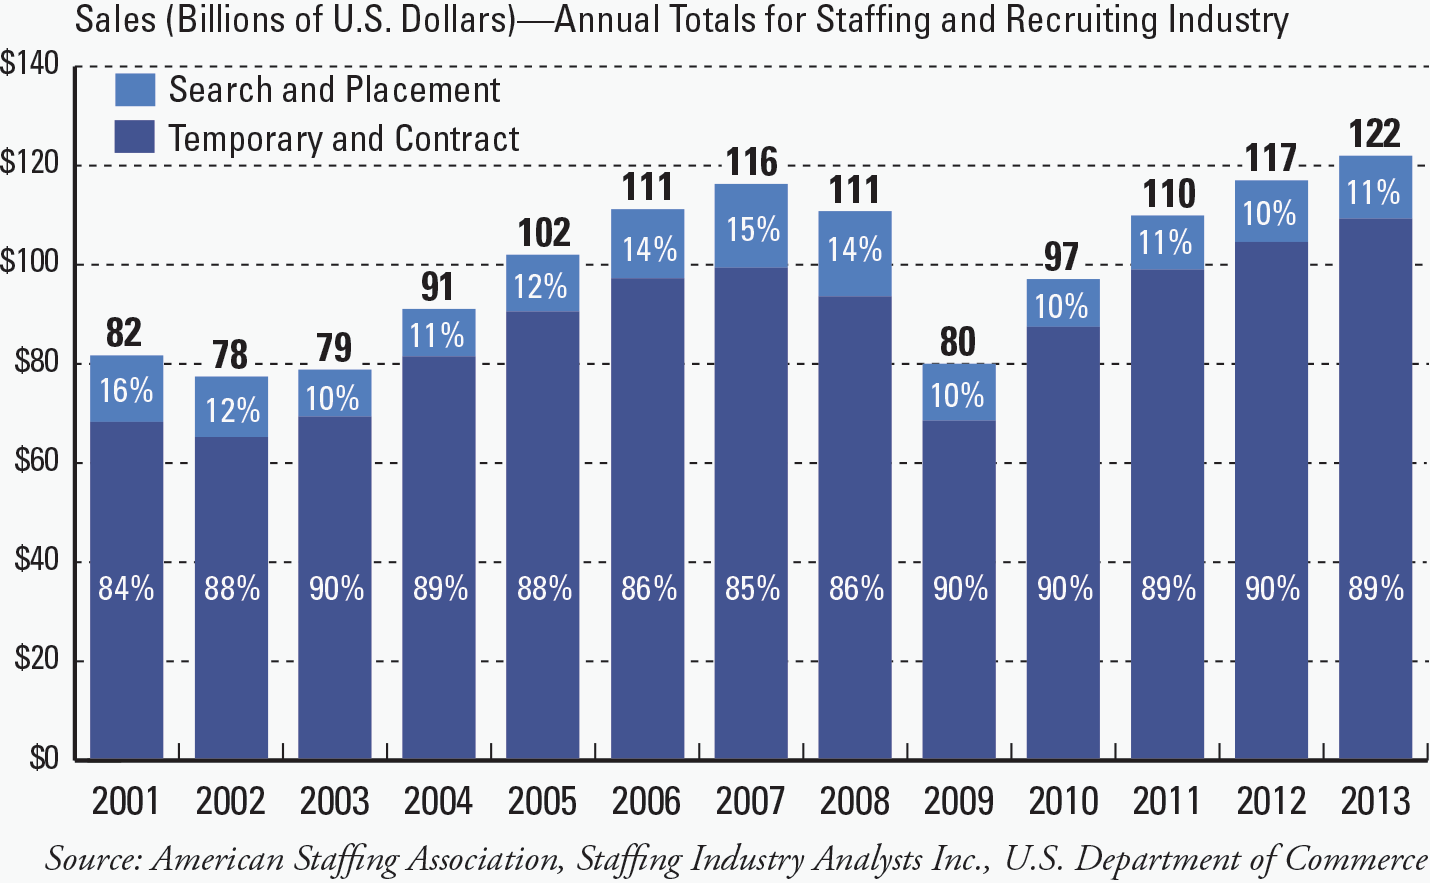 Annual Sales Totals for the Staffing and Recruiting industry